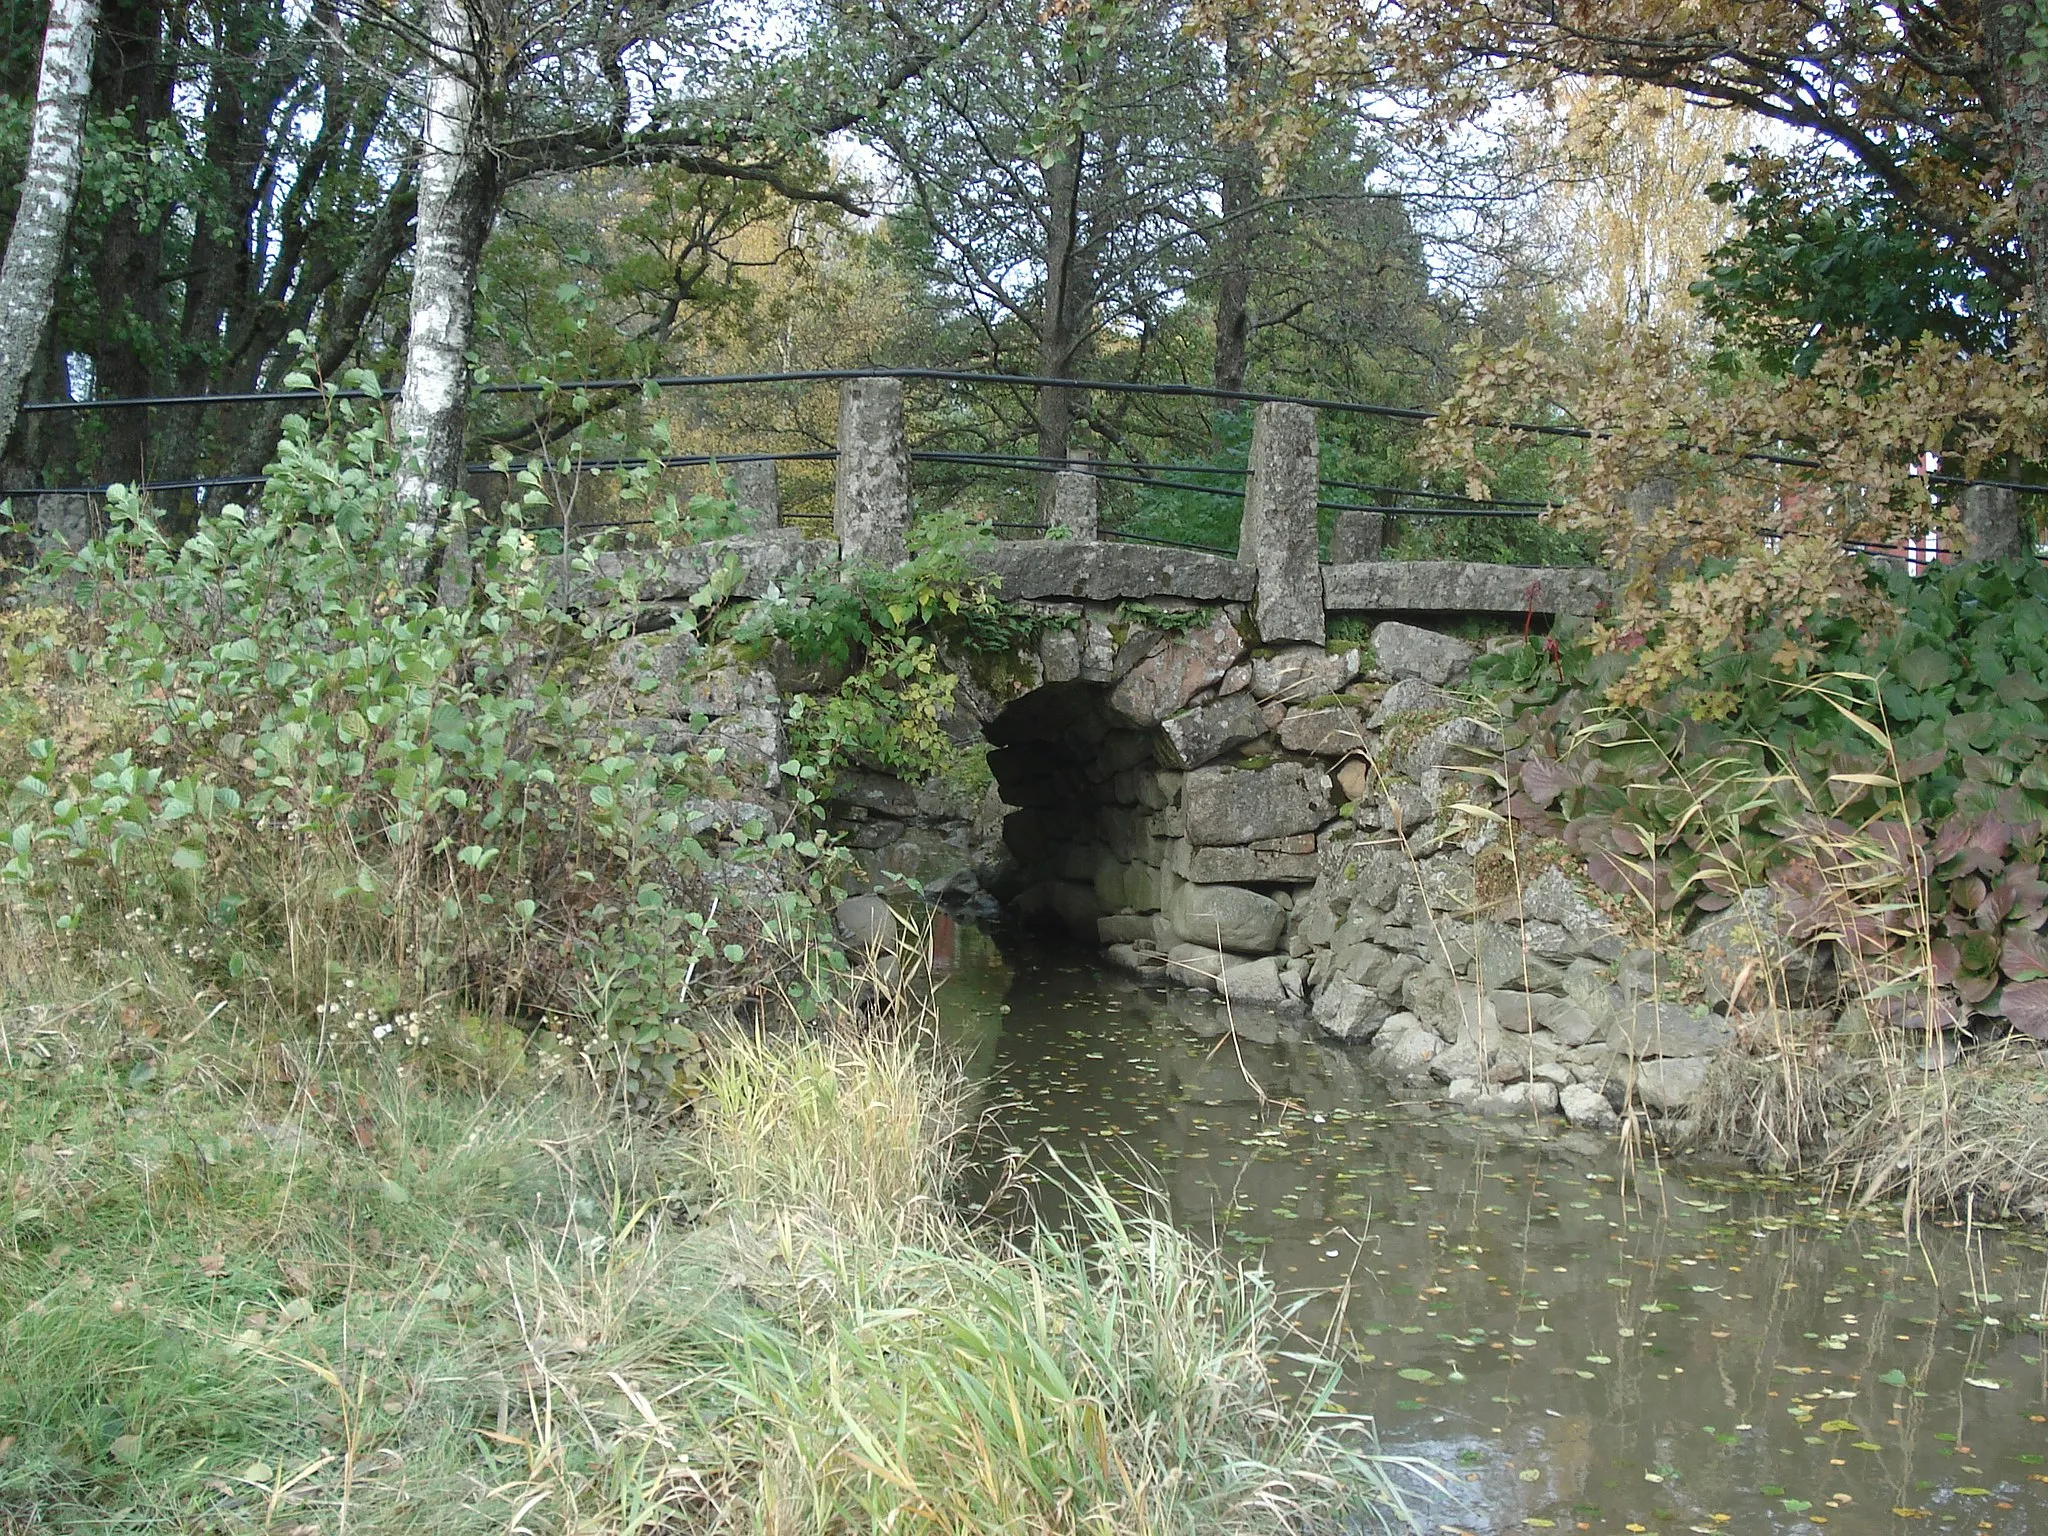 Photo showing: The Muntti Bridge is located on an absolete section of the Turku–Taivassalo road in Finland. This small single-span stone-vault bridge was built in 1850 to link the village of Koivisto to Taivasalo. The bridge was approved as a museum bridge in 1982.